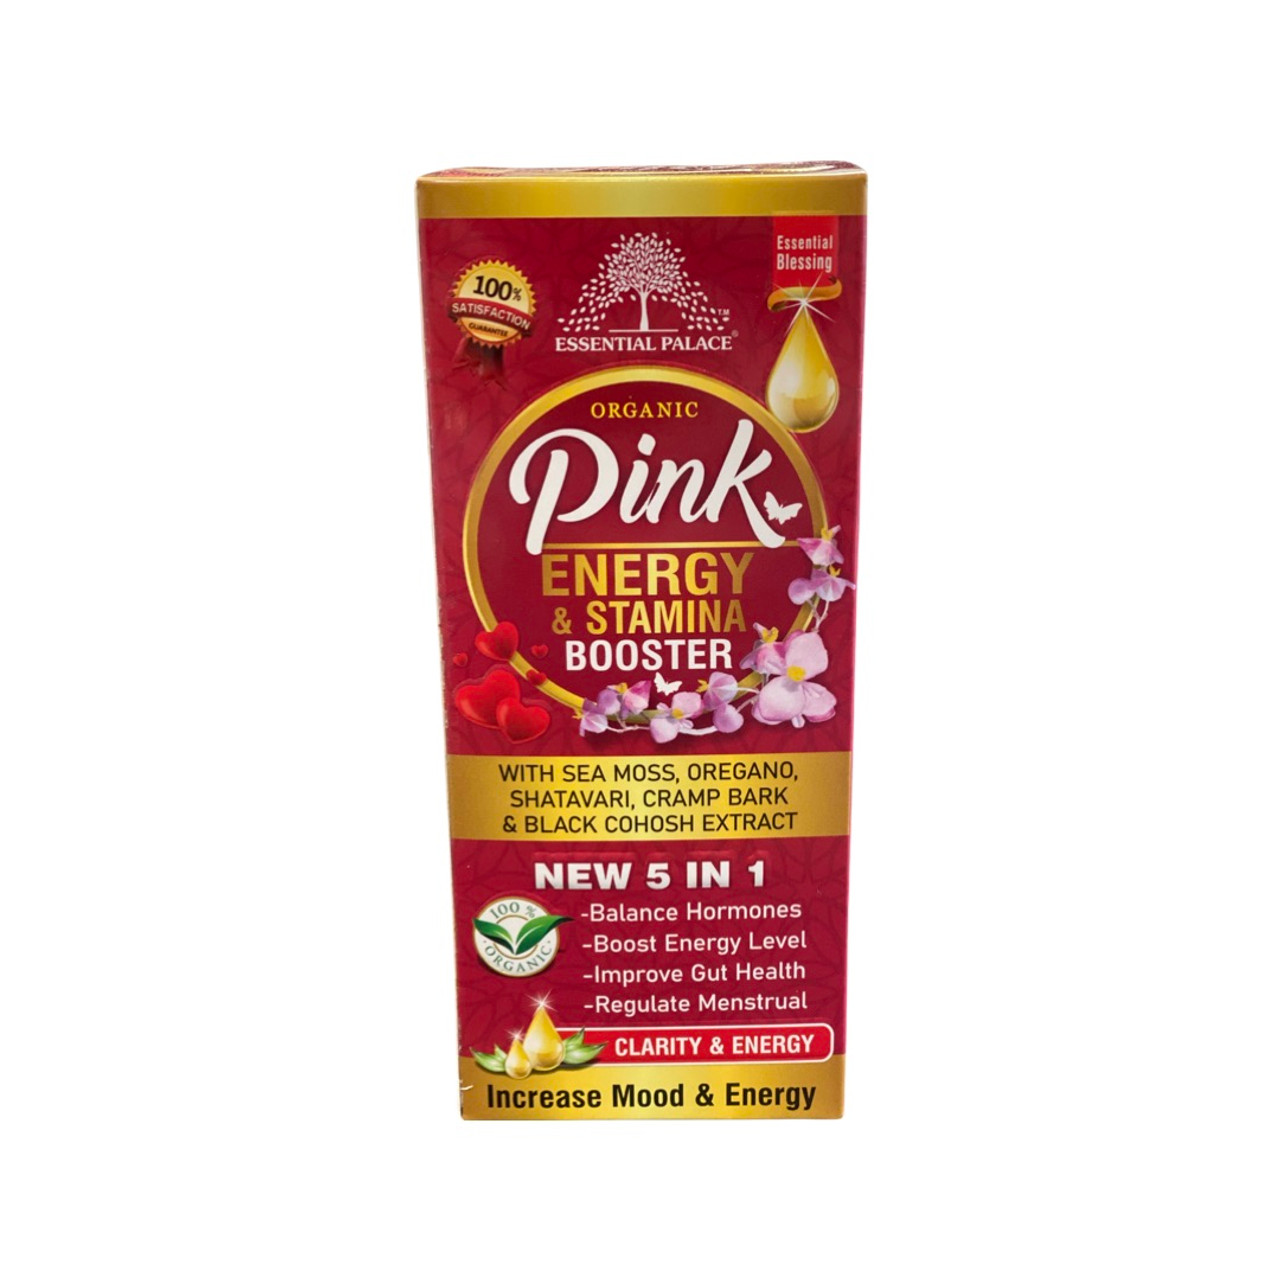 Pink Energy & Stamina Booster 8 Fl oz | Essential Palace